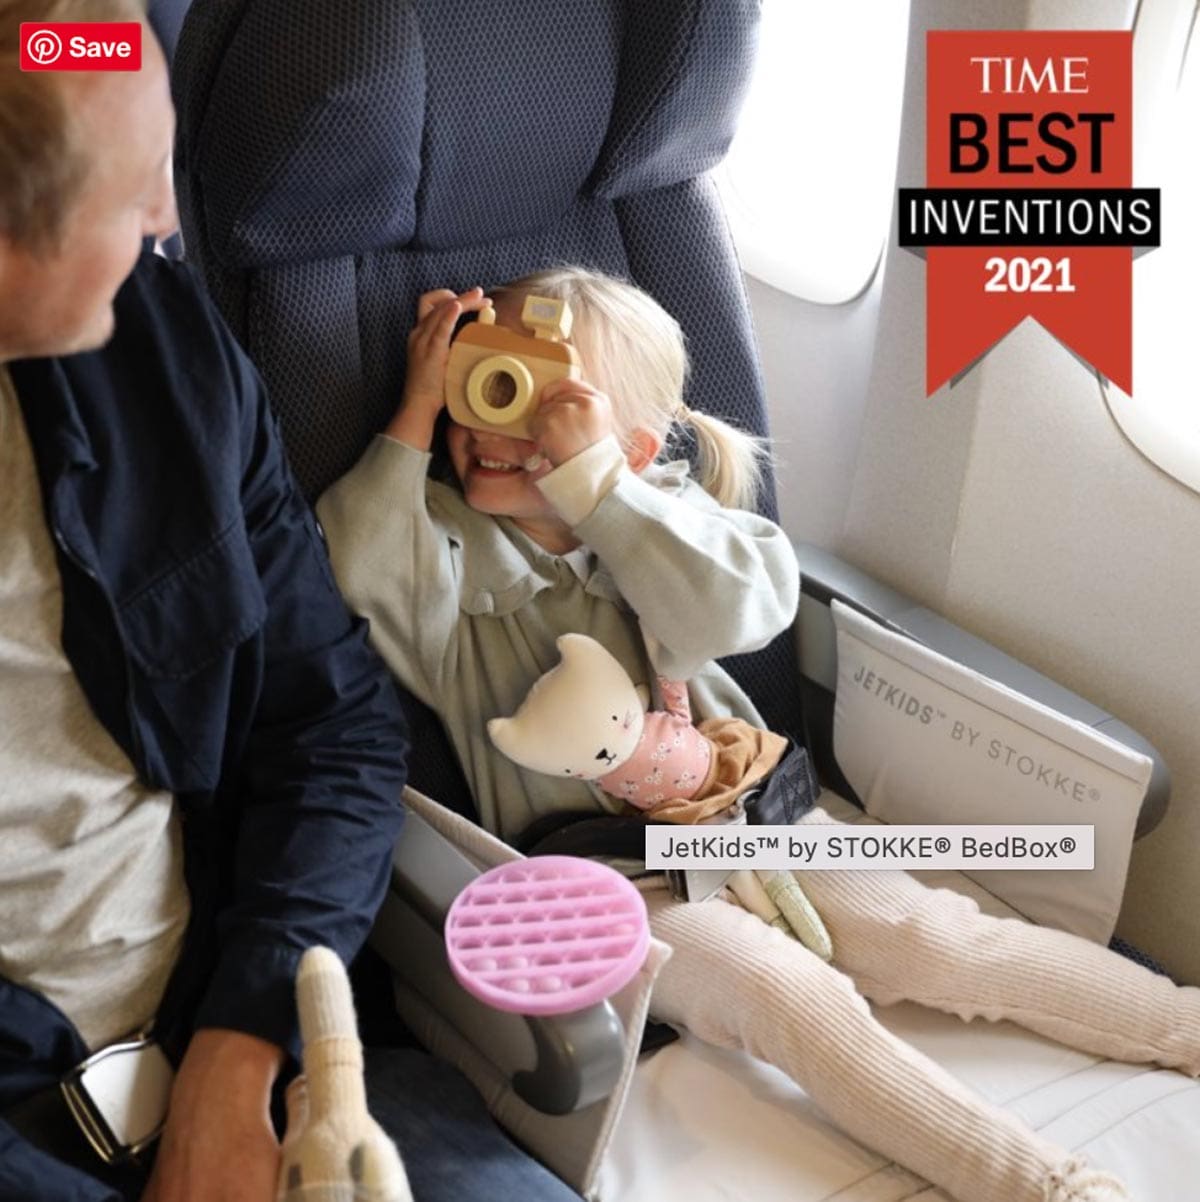 A little girl uses her Jetkids by Stokke Bedbox, one of the best products for sleeping on long international flights with kids.